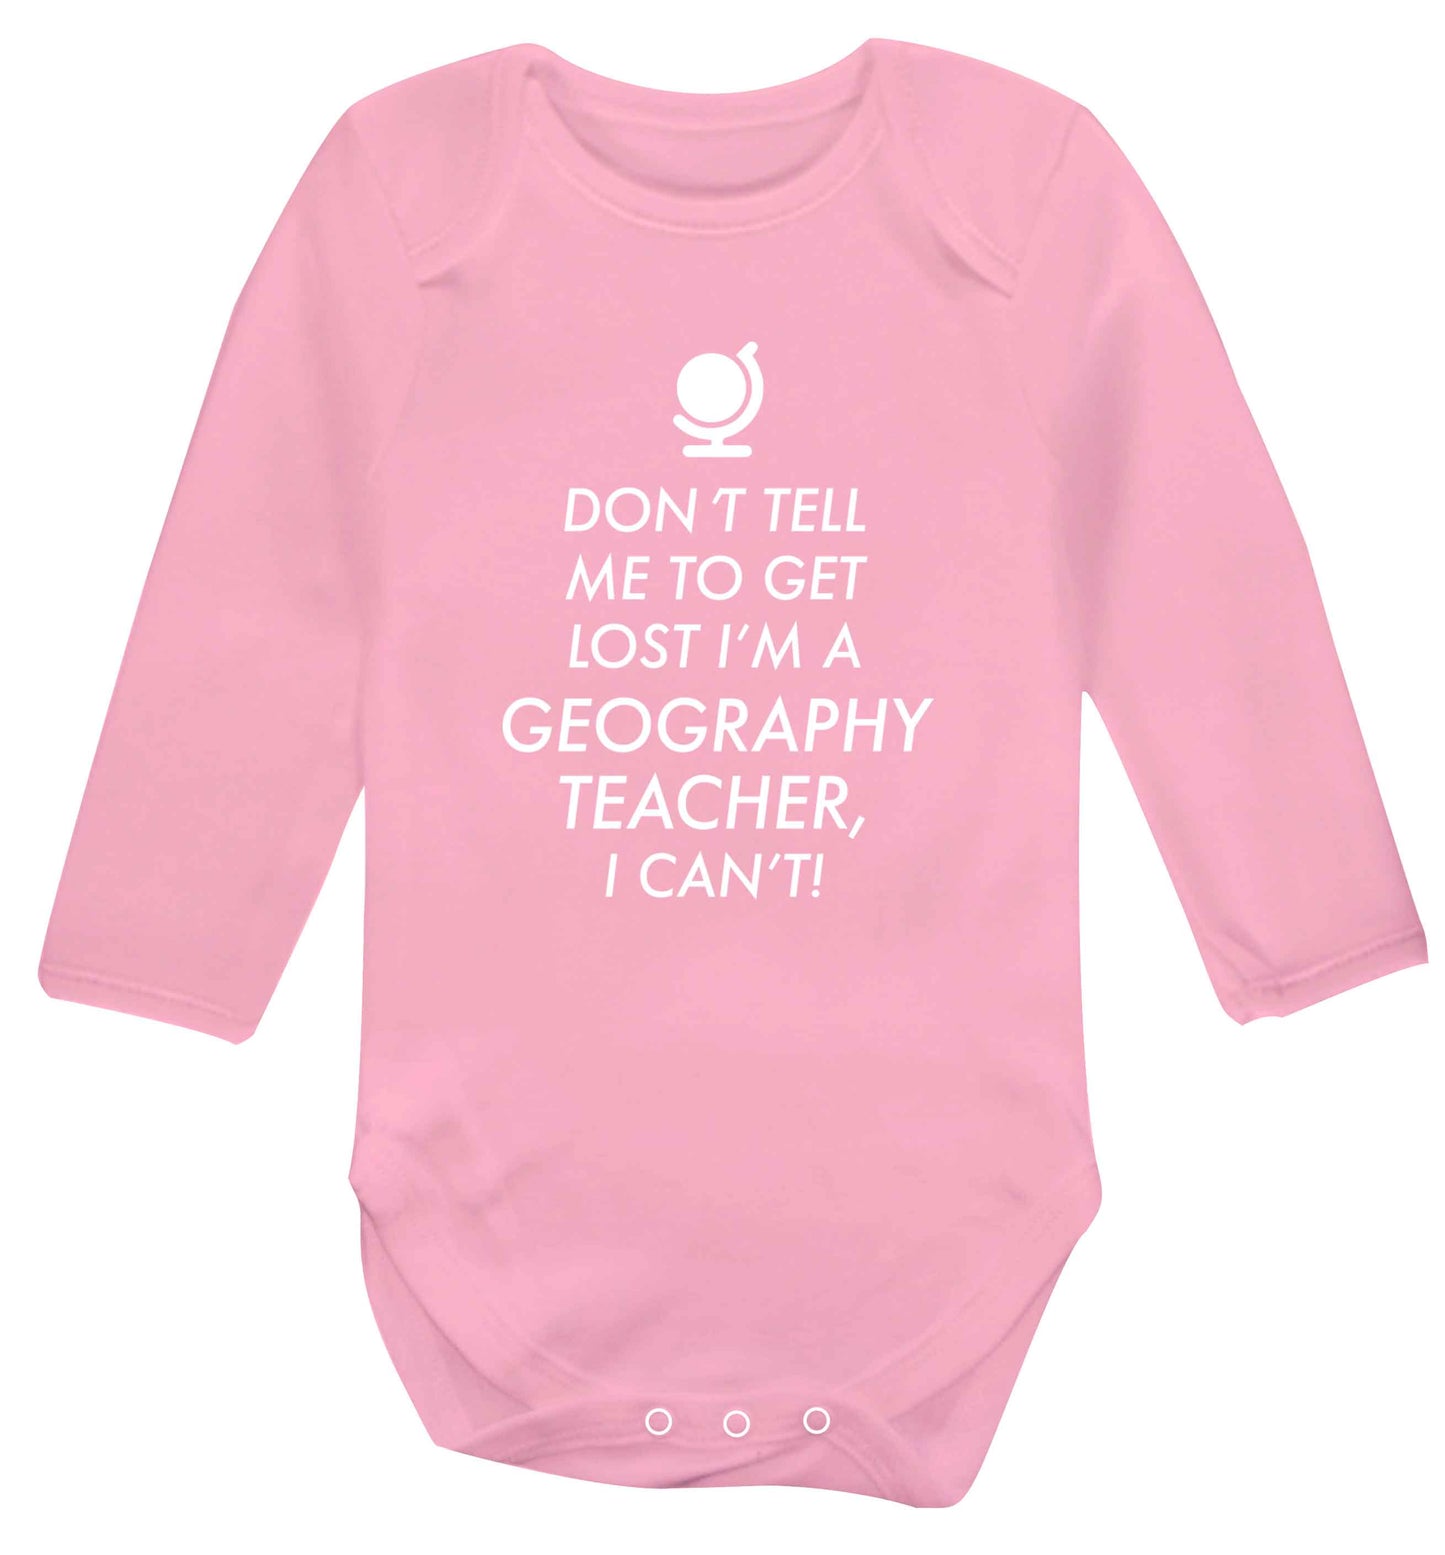 Don't tell me to get lost I'm a geography teacher, I can't Baby Vest long sleeved pale pink 6-12 months